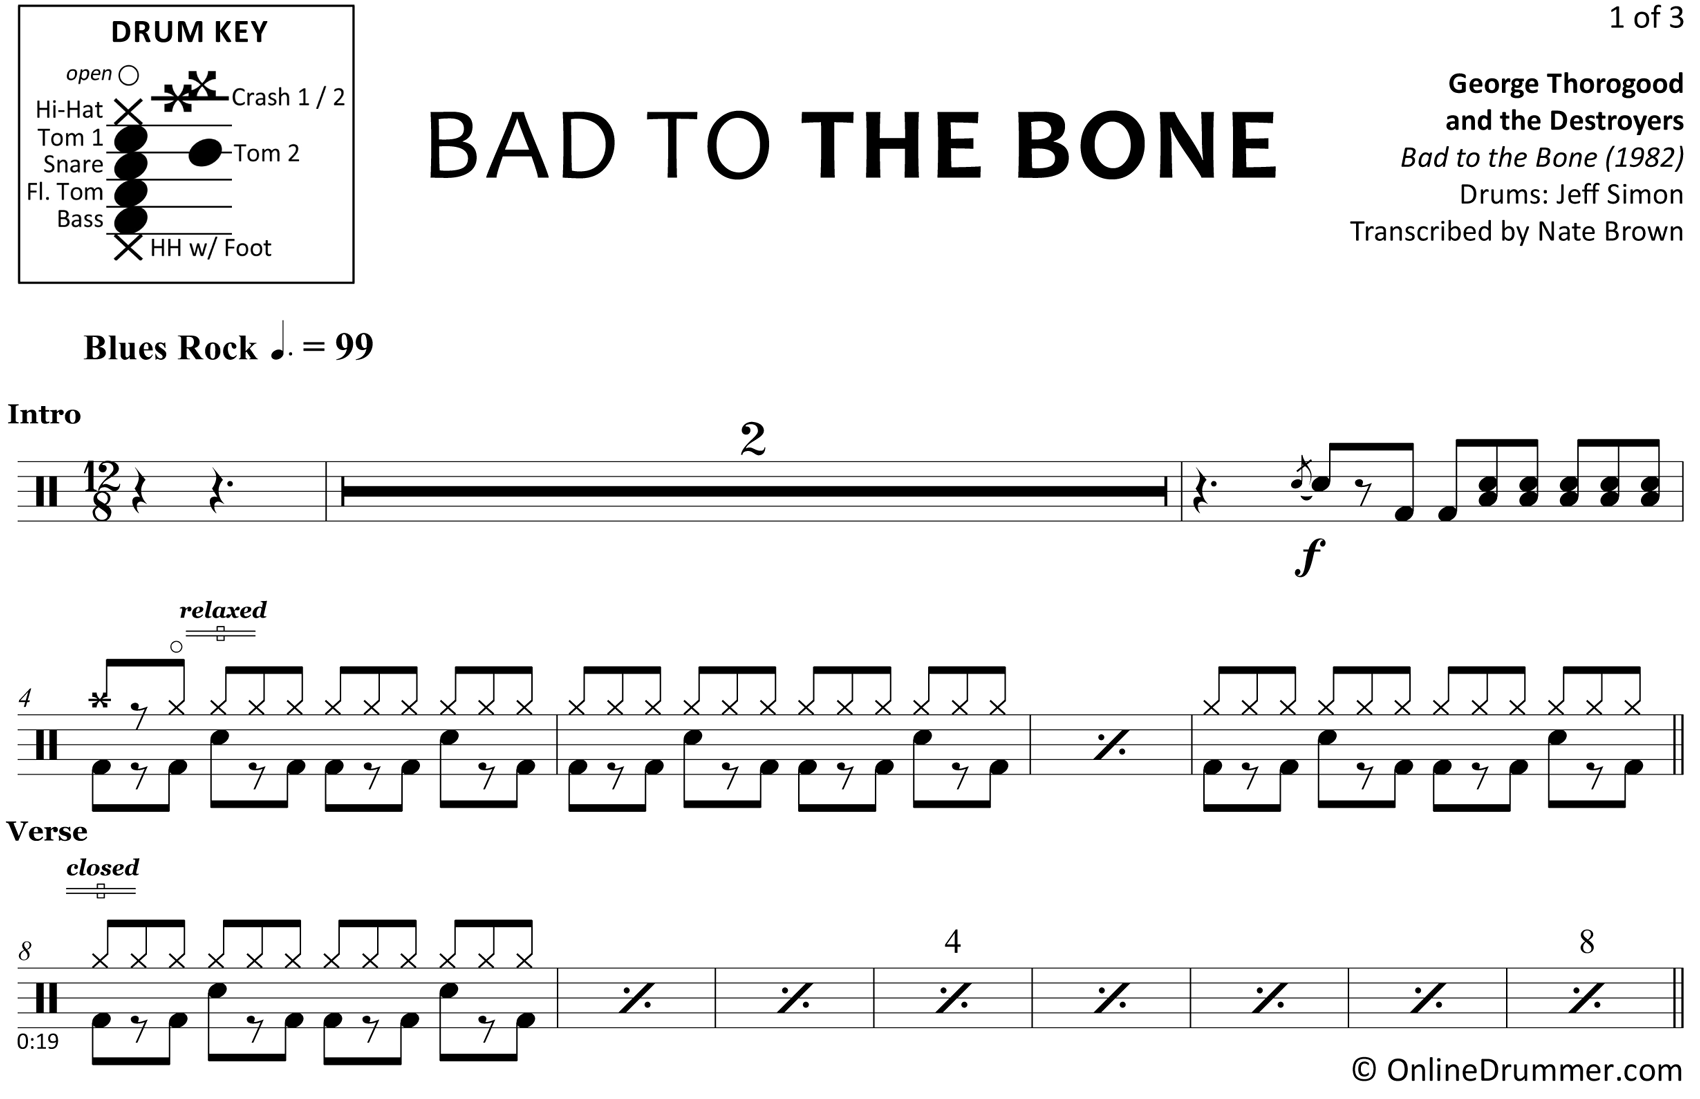 Bad to the Bone - George Thorogood and the Destroyers - Drum Sheet Music